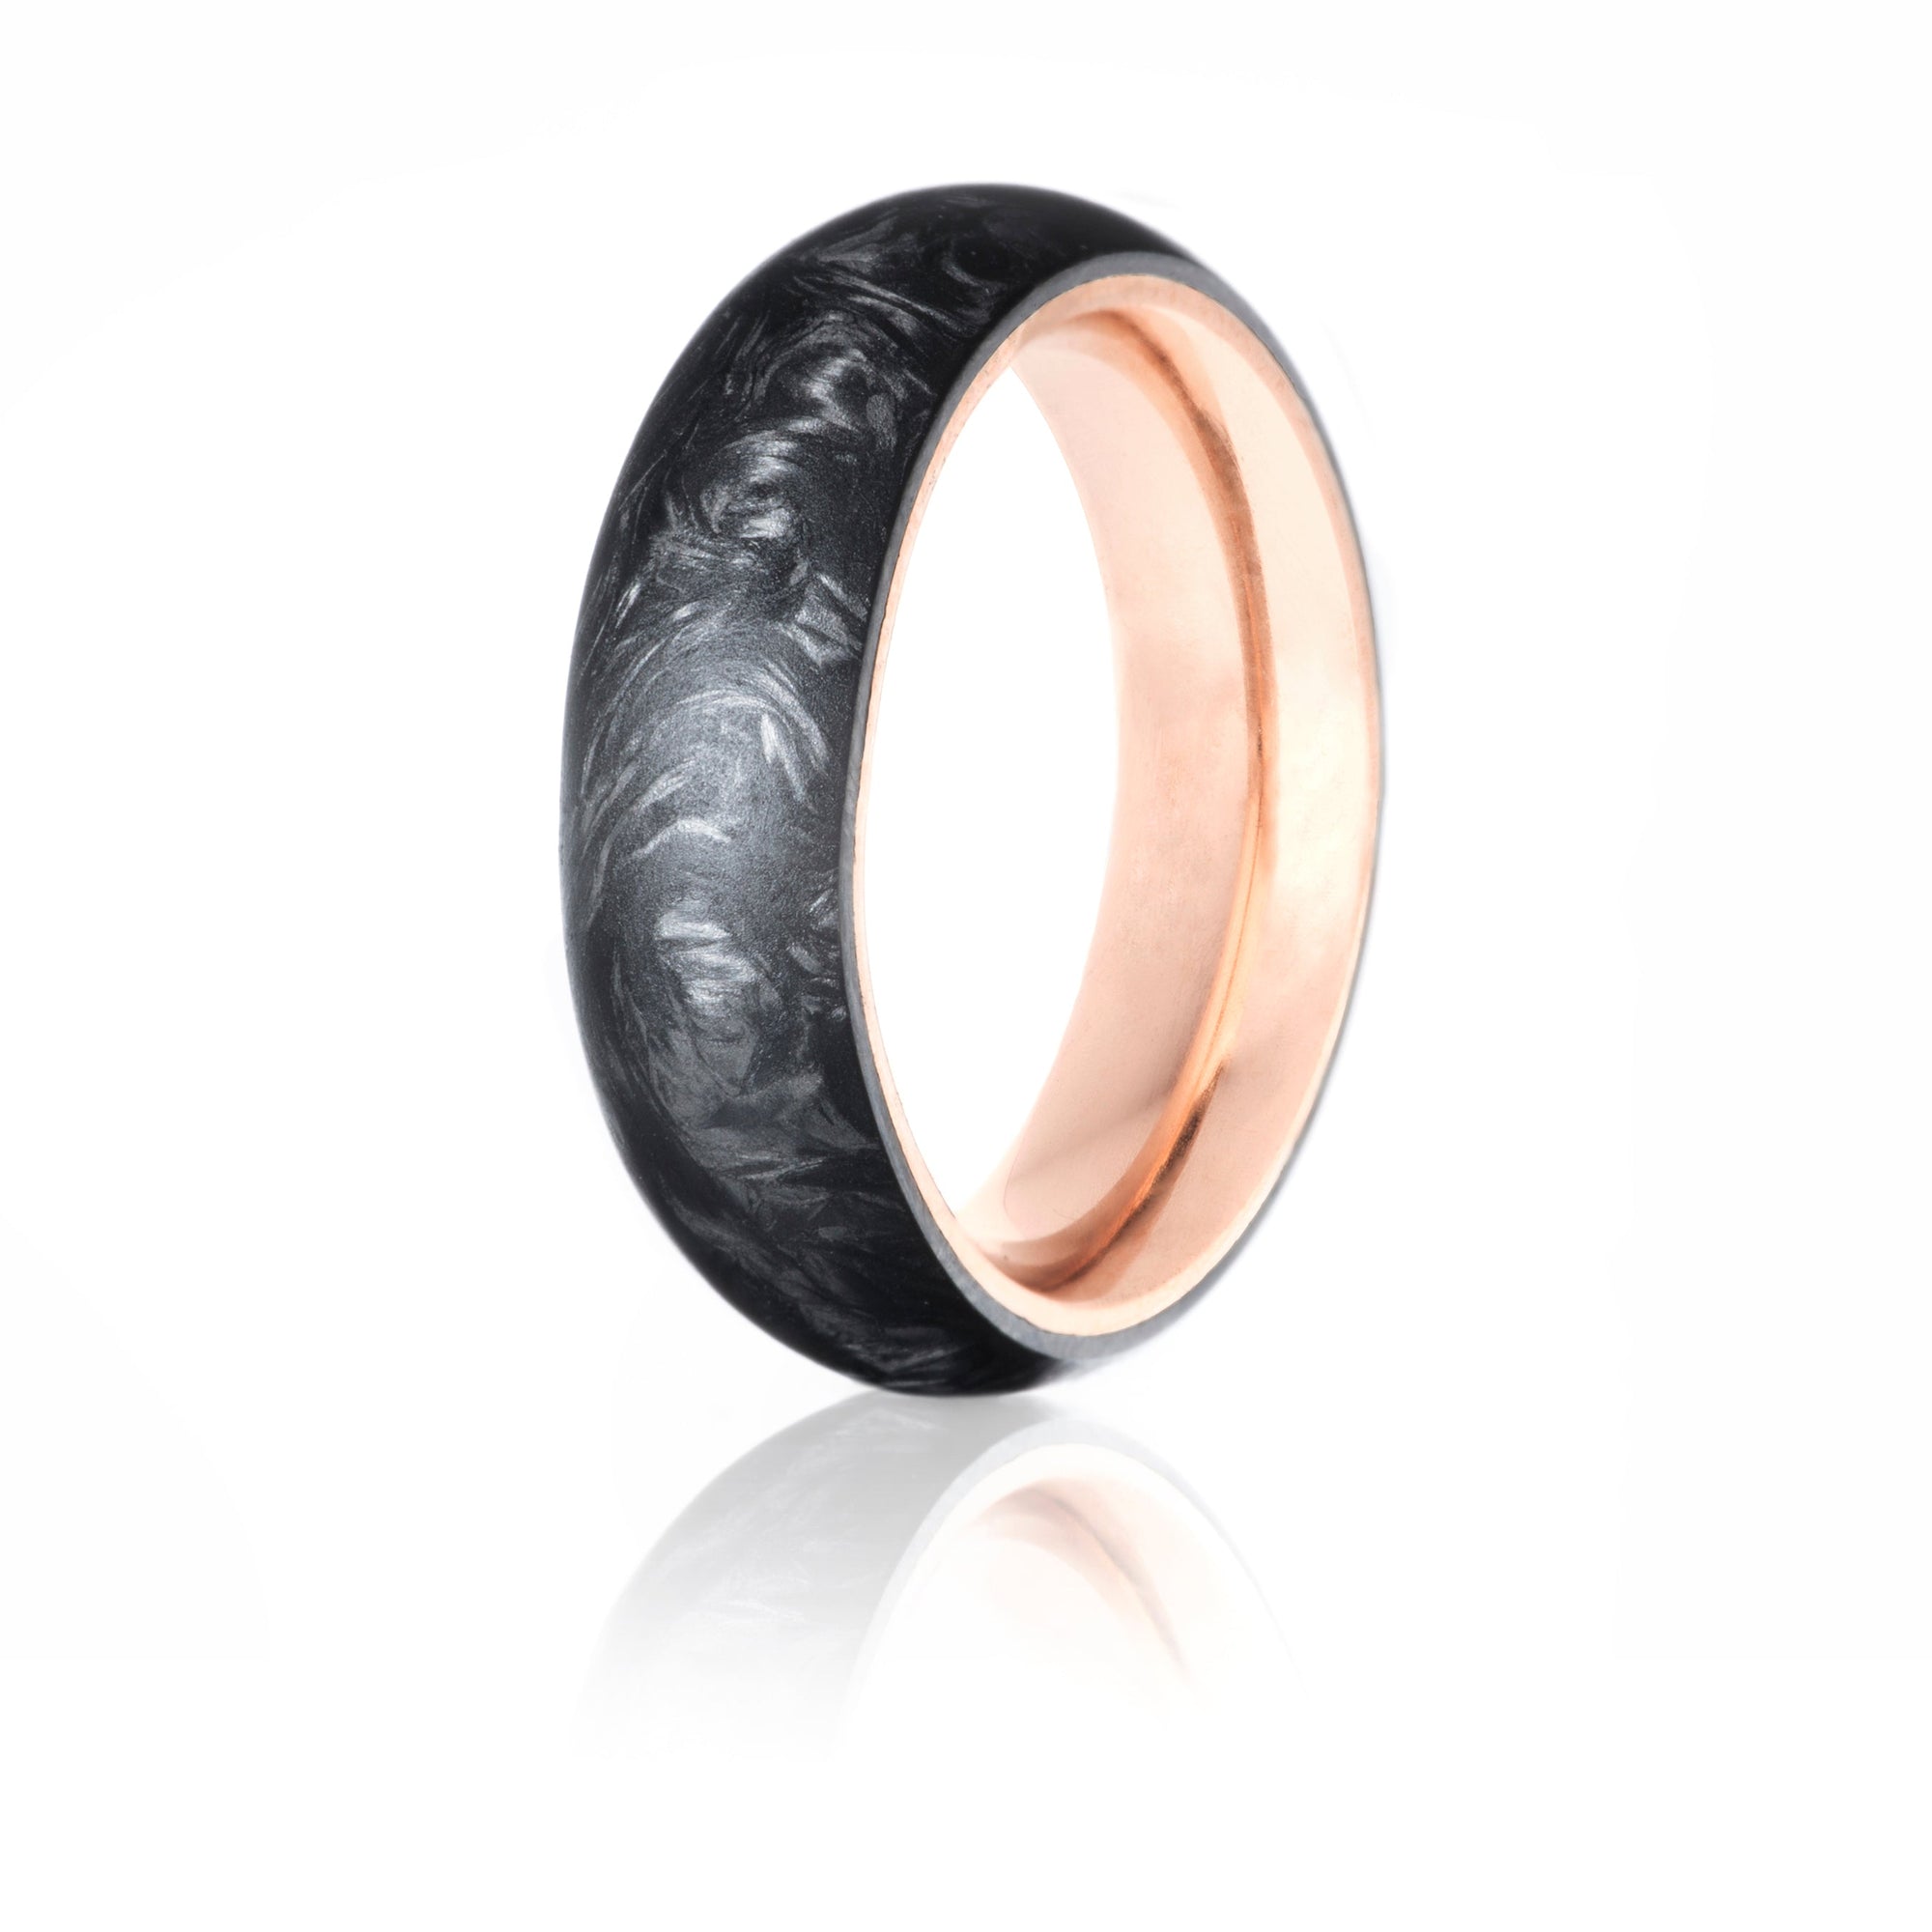 Forged Carbon radius ring with rose gold interior.